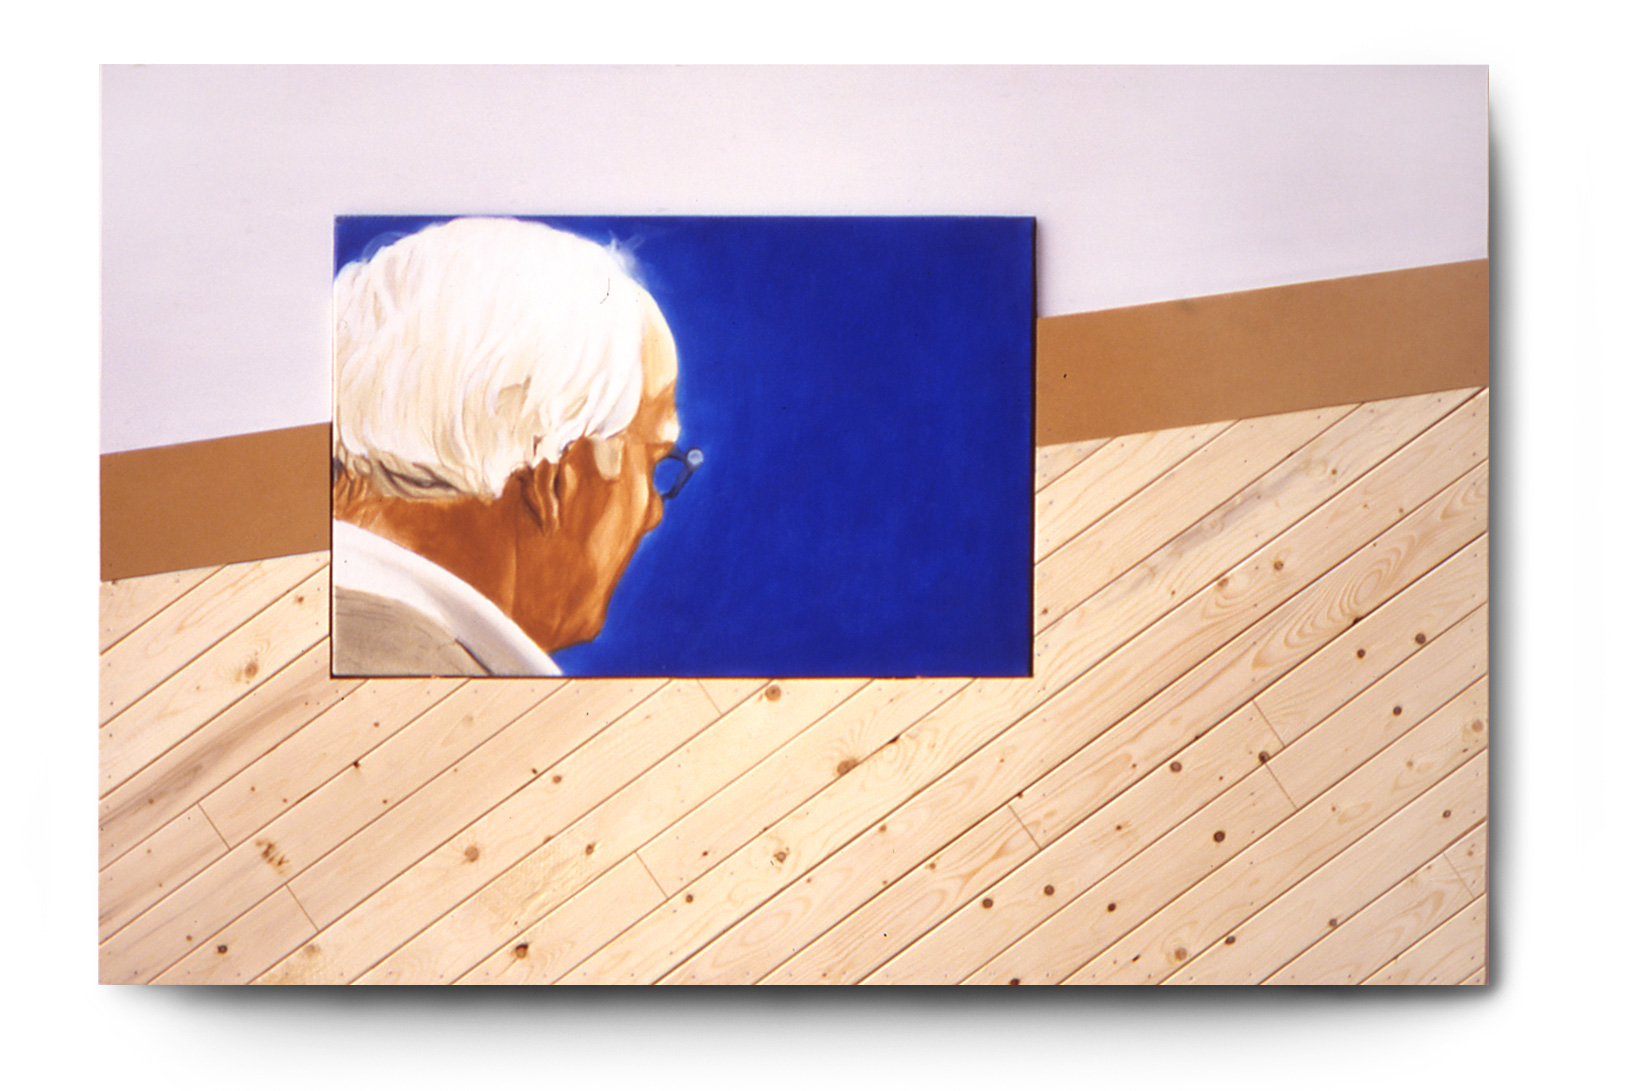 Looking At Klein, inlay of acrylic on canvas by Tom Hbert